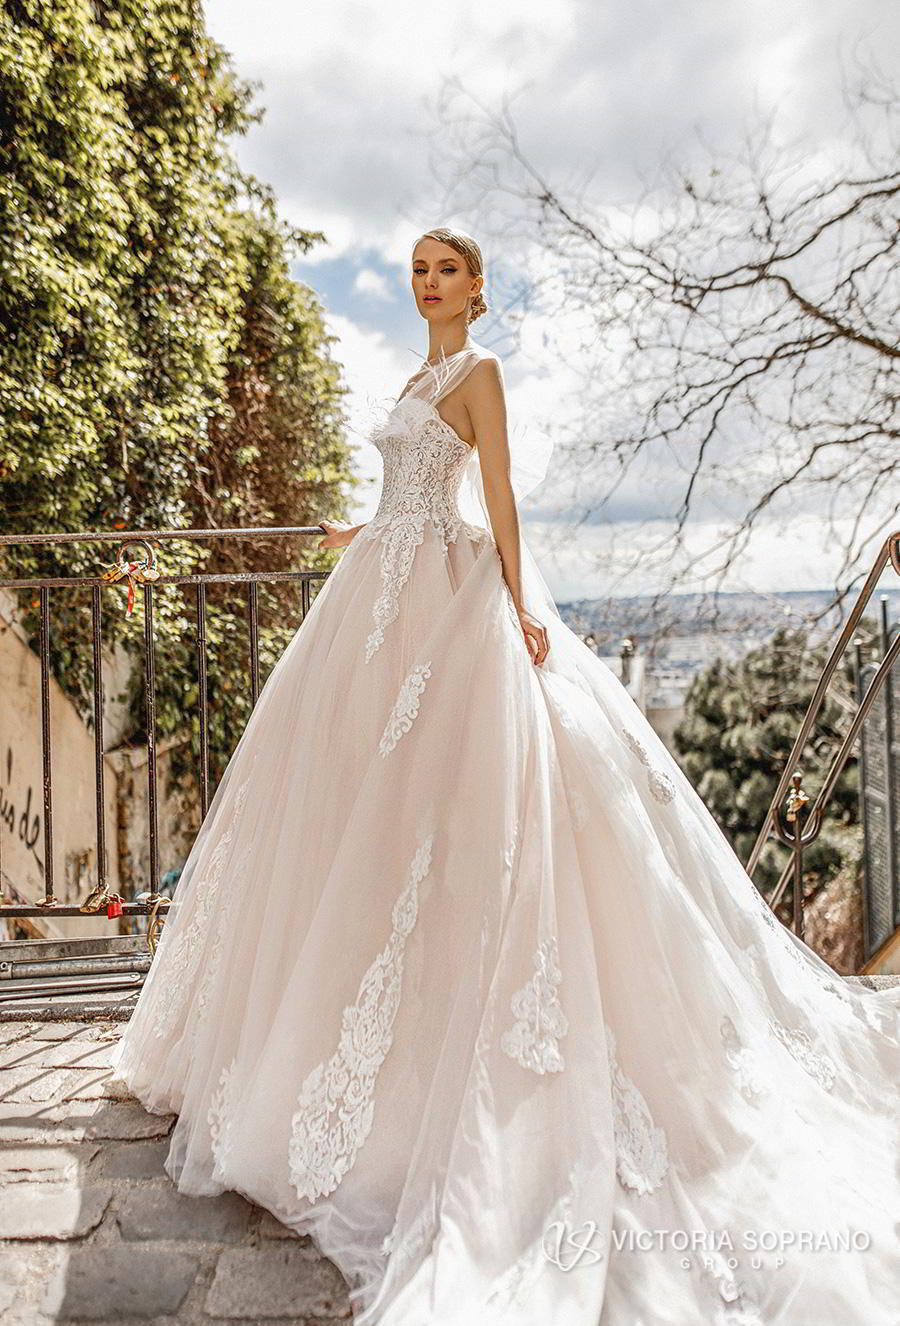 These Victoria Soprano Wedding Dresses Will Make You Swoon! — 2019 ...